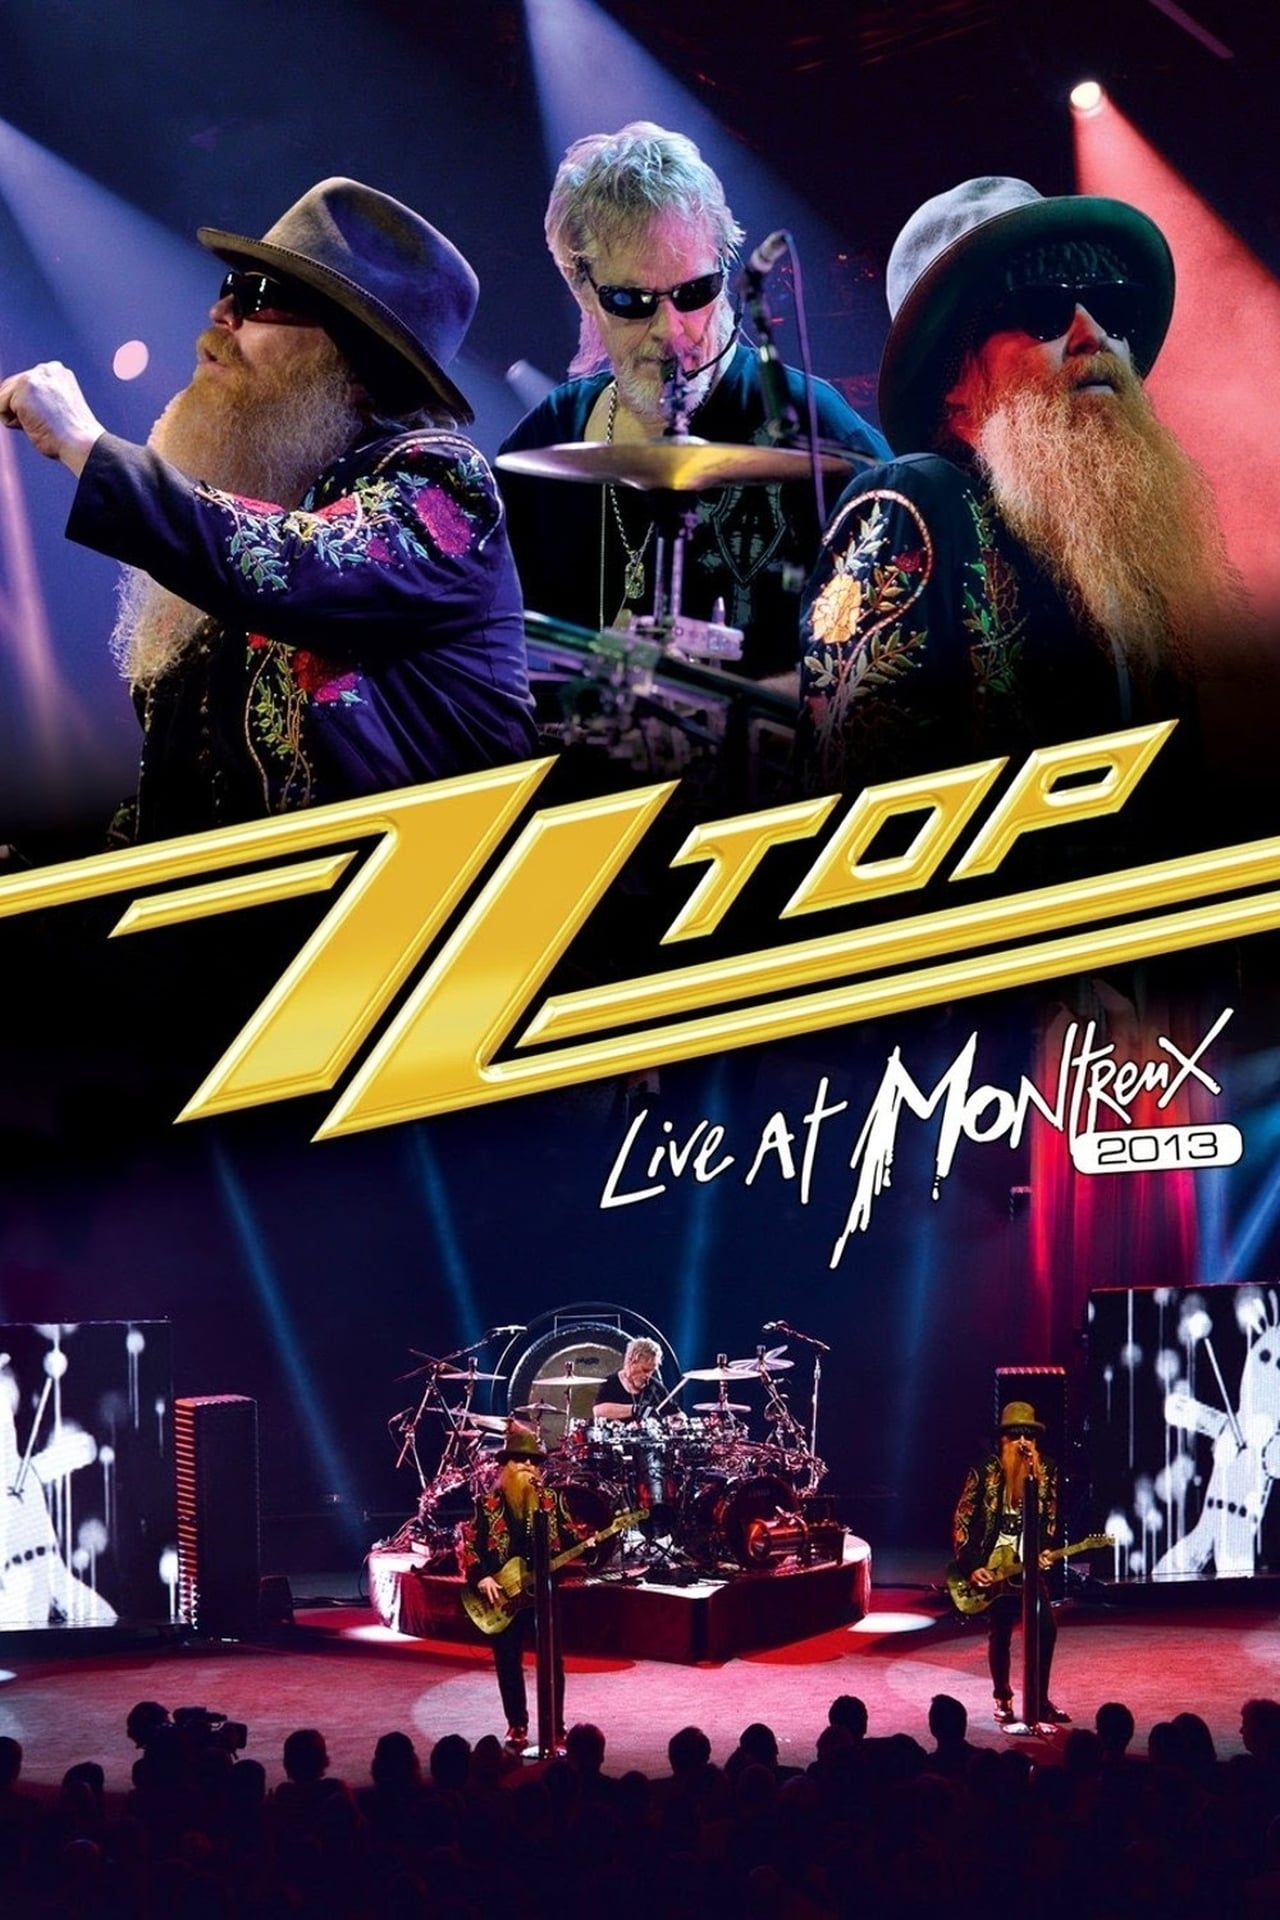 ZZ Top – Live at Montreux 2013